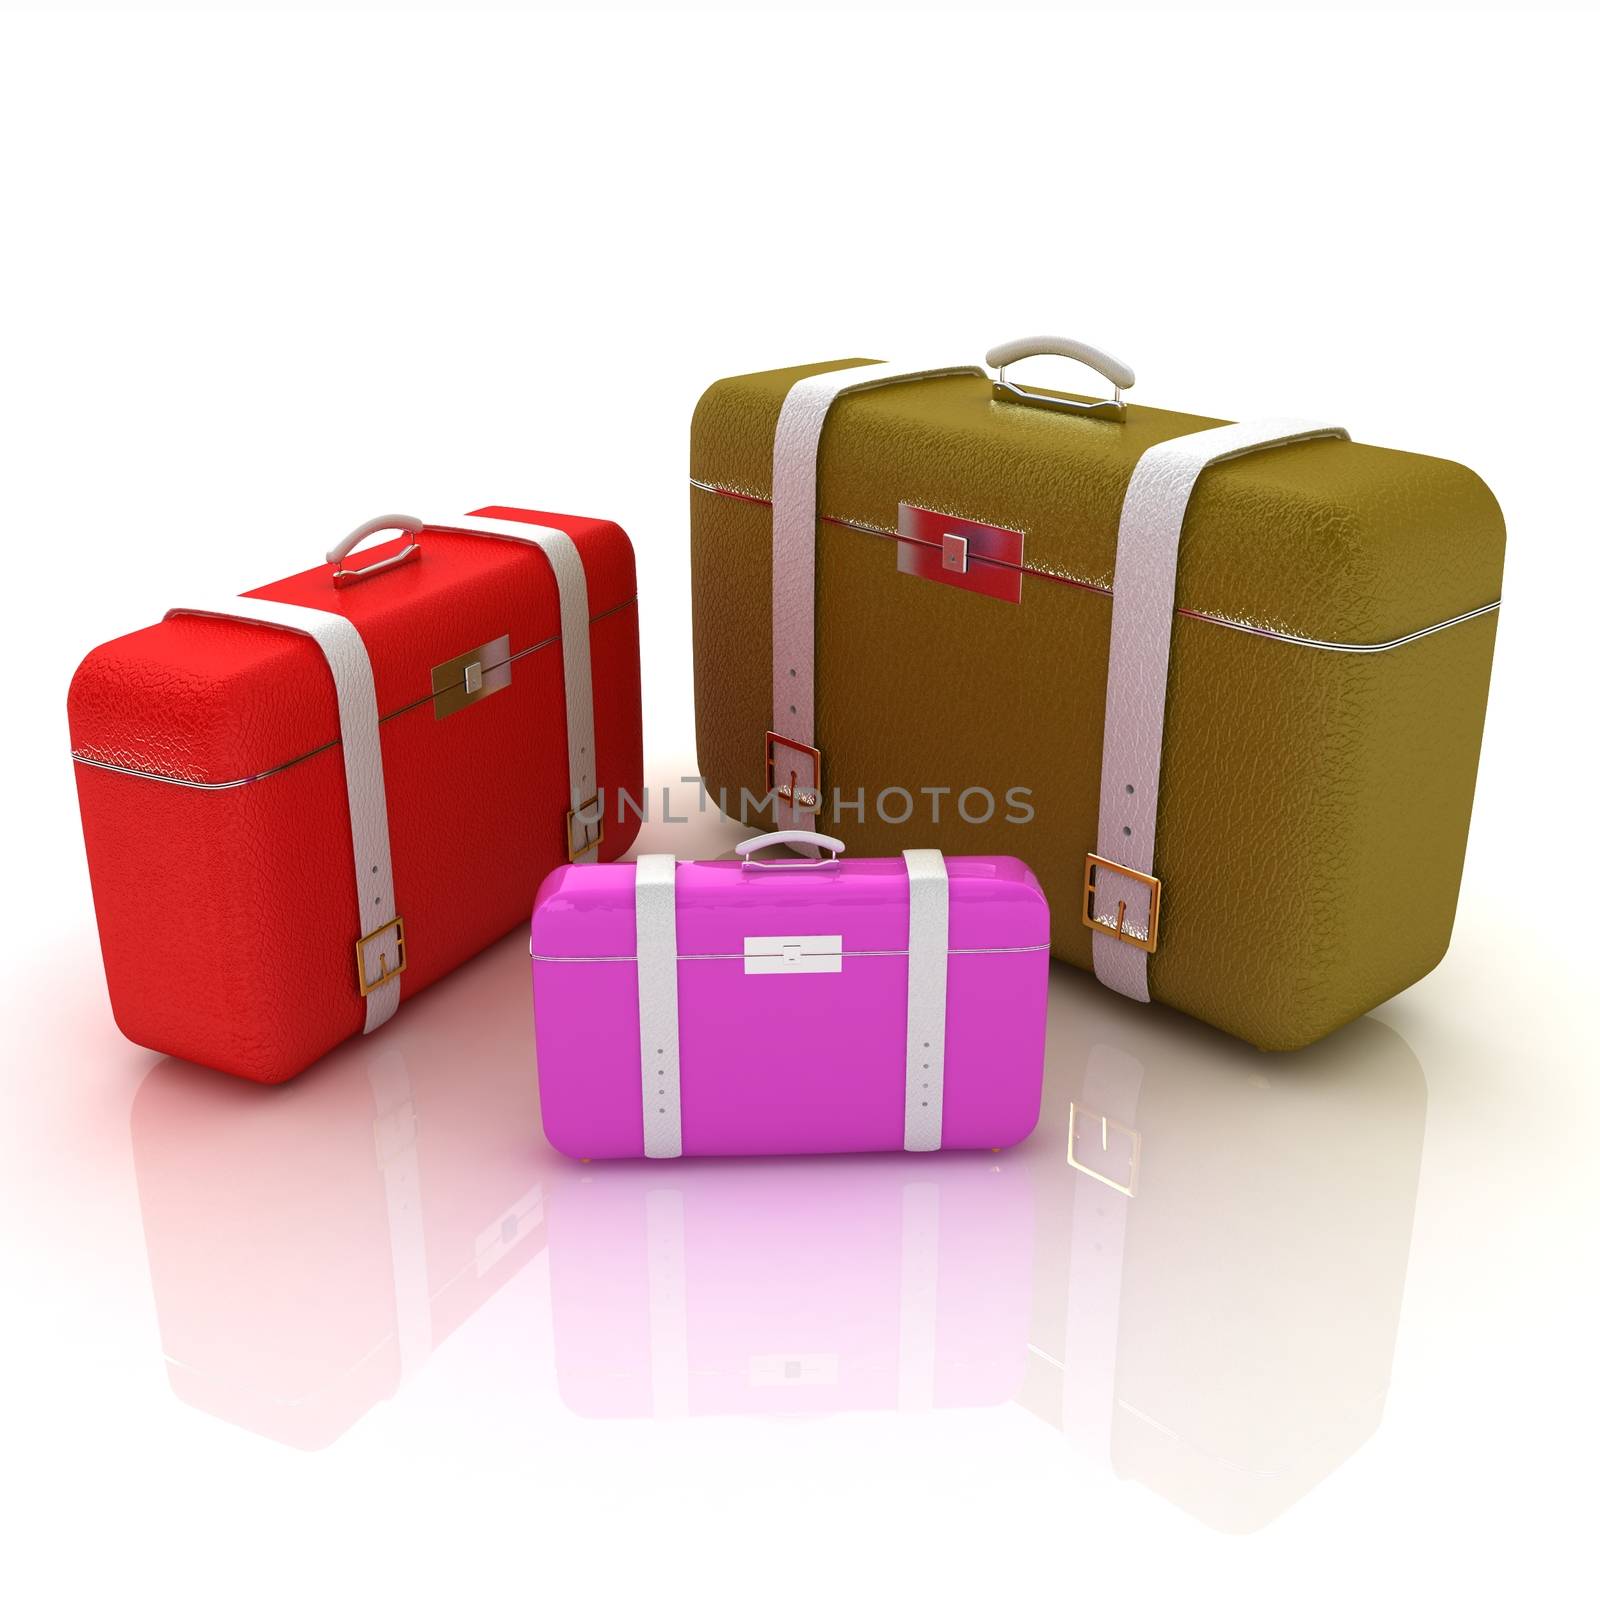 Traveler's suitcases. Family travel concept